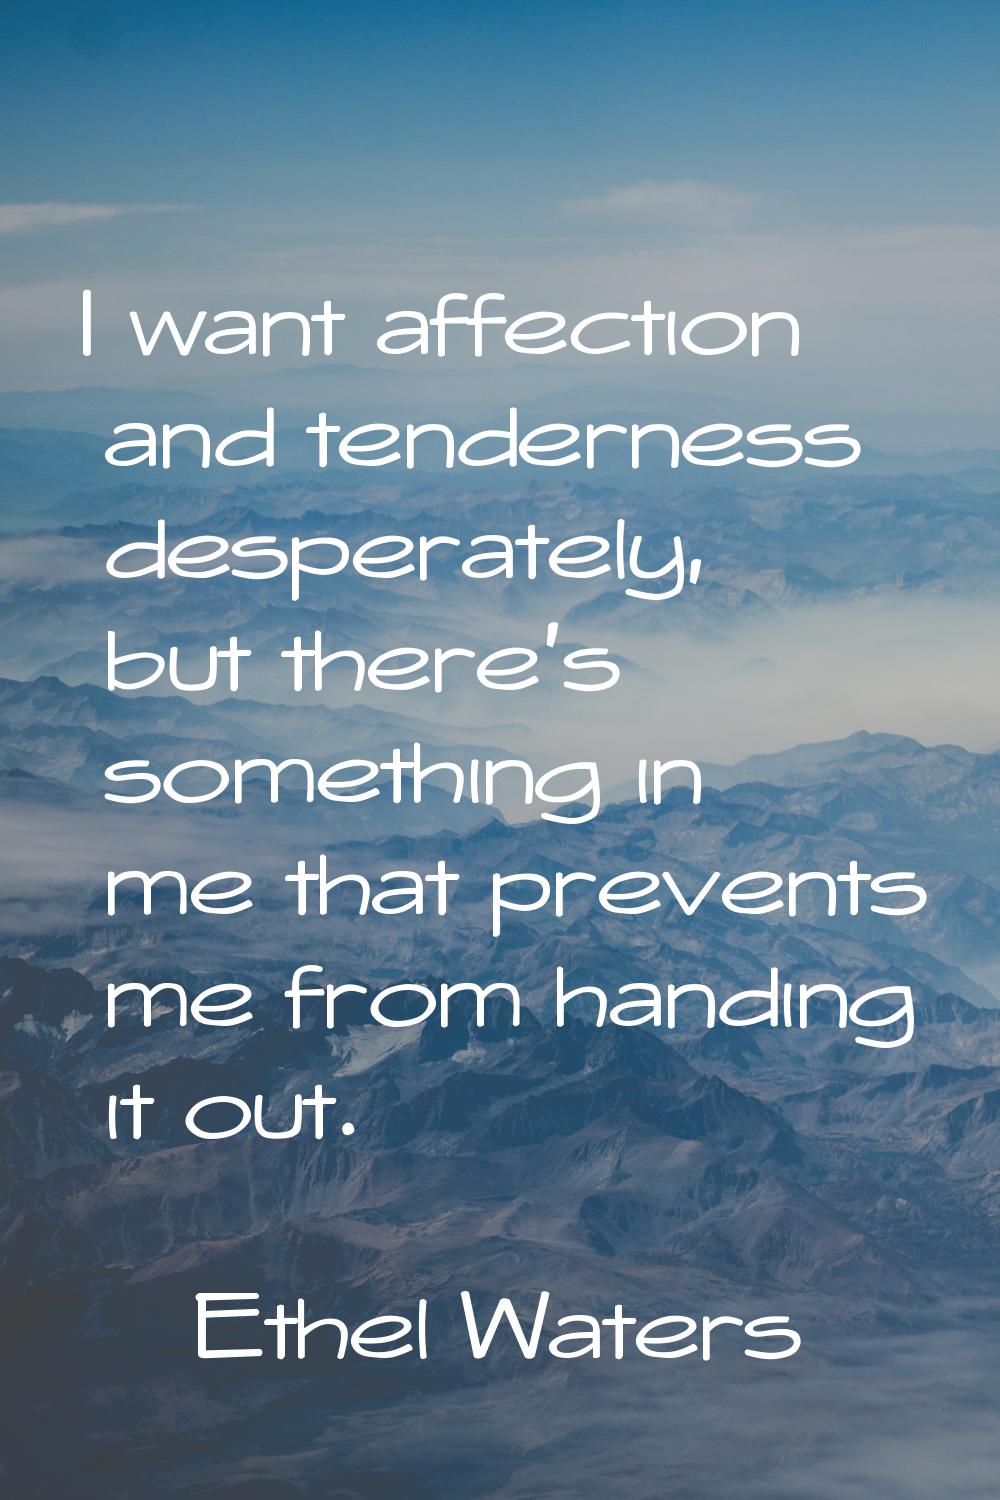 I want affection and tenderness desperately, but there's something in me that prevents me from hand